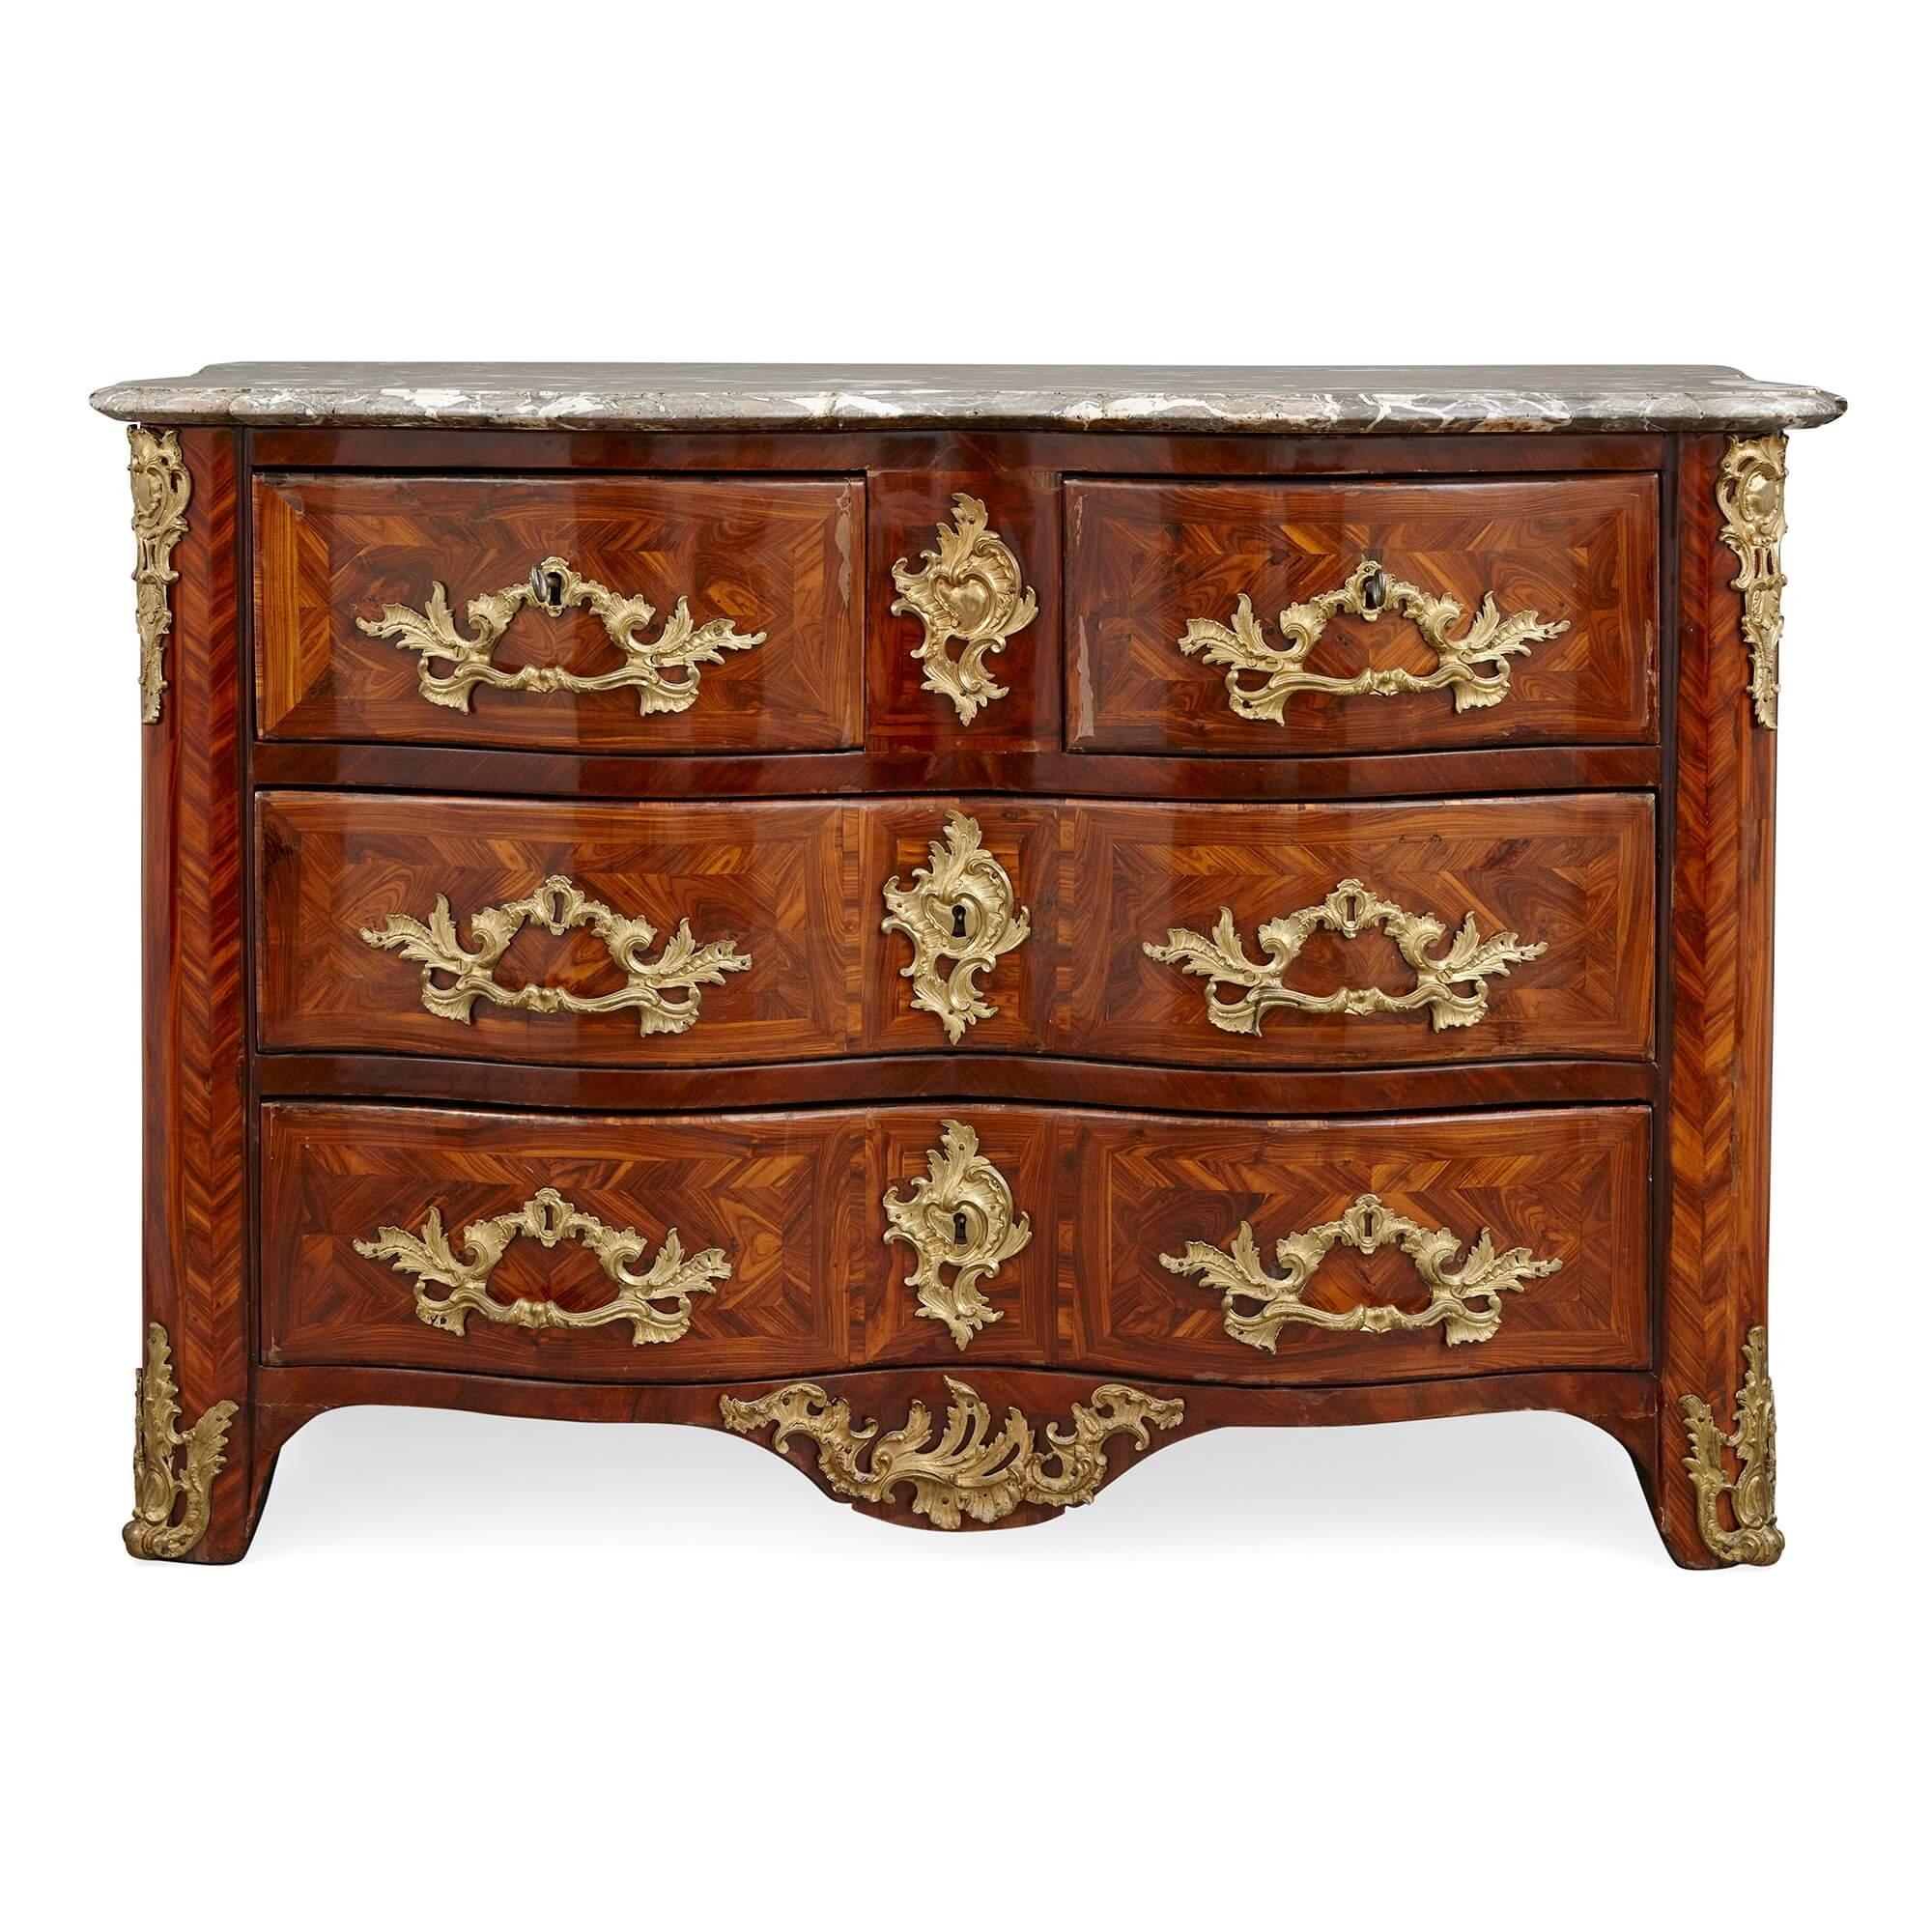 A Louis XV period ormolu and marble mounted commode.
French, 18th century.
Measures: height 84cm, width 122cm, depth 68cm.

With a veined grey marble top set above two small and two long drawers, and with a partial stamp and the letters 'JME,'